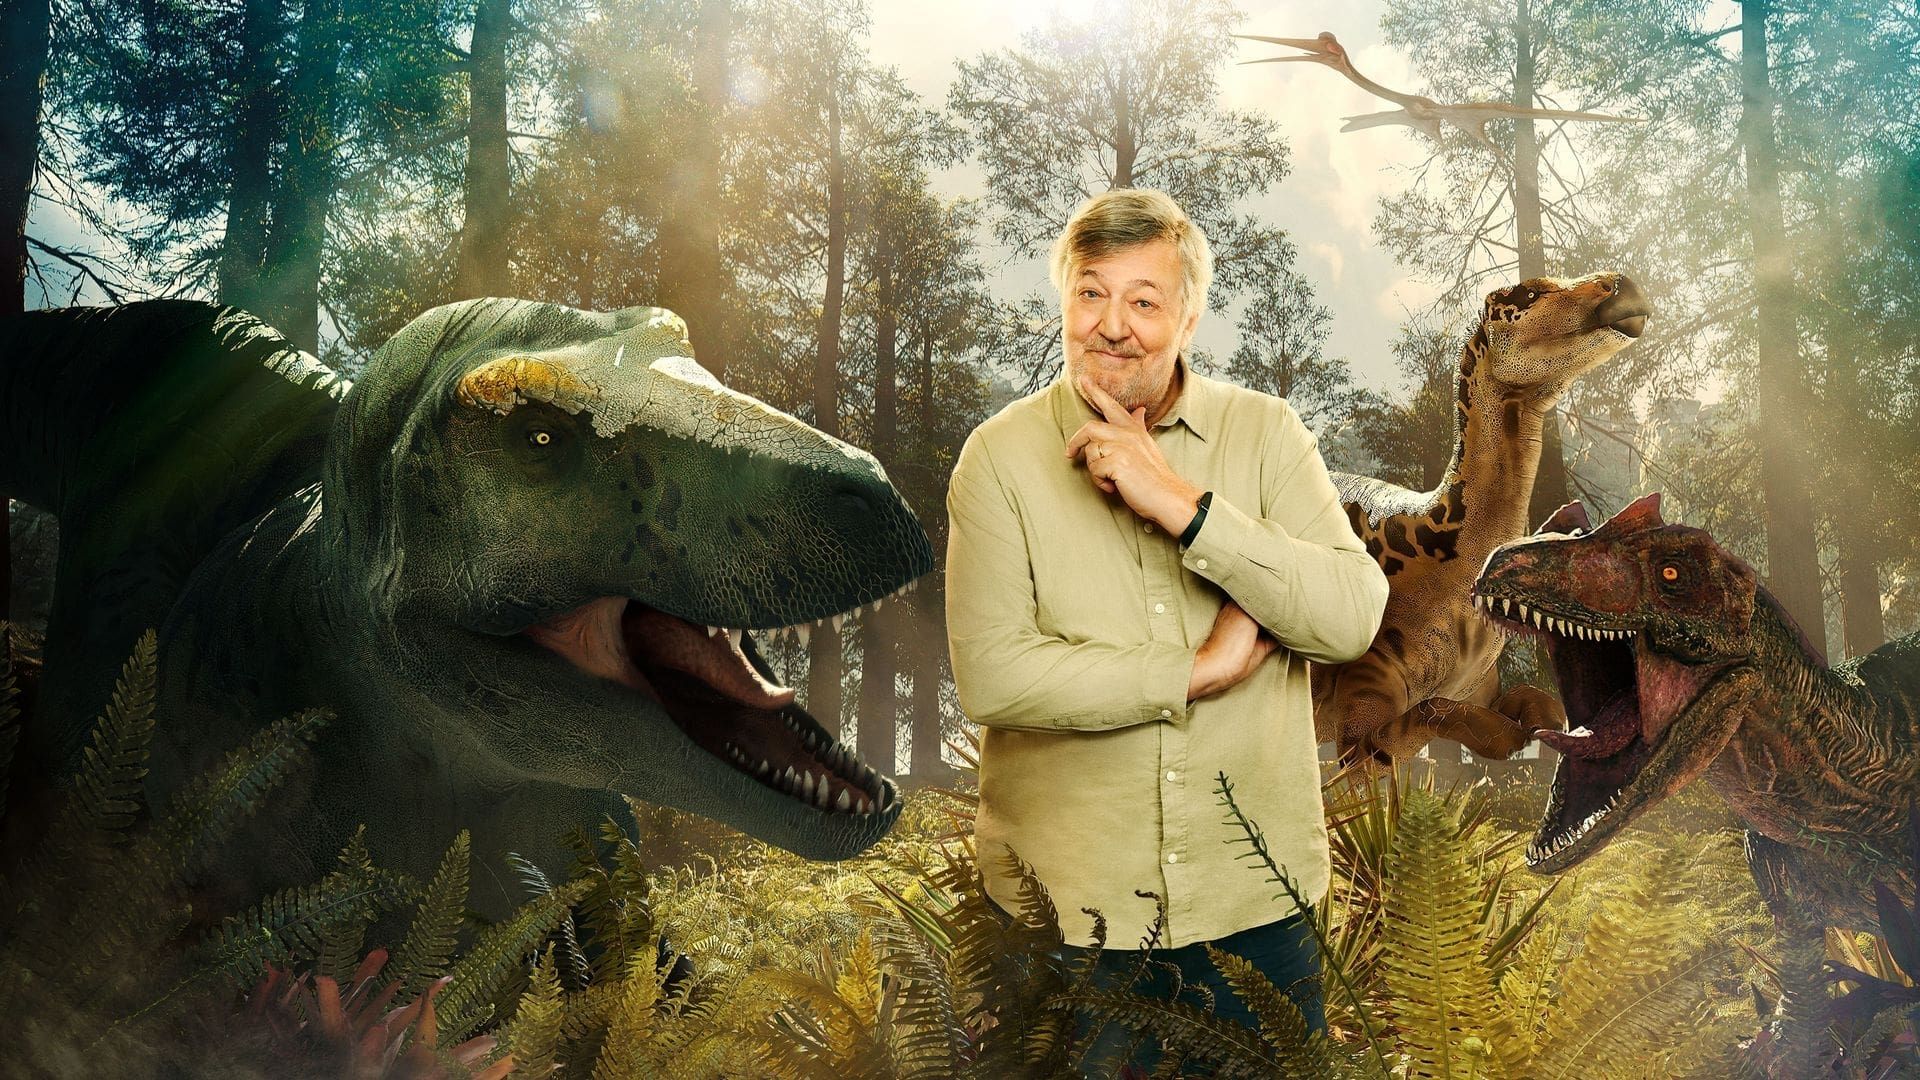 Dinosaur - with Stephen Fry background